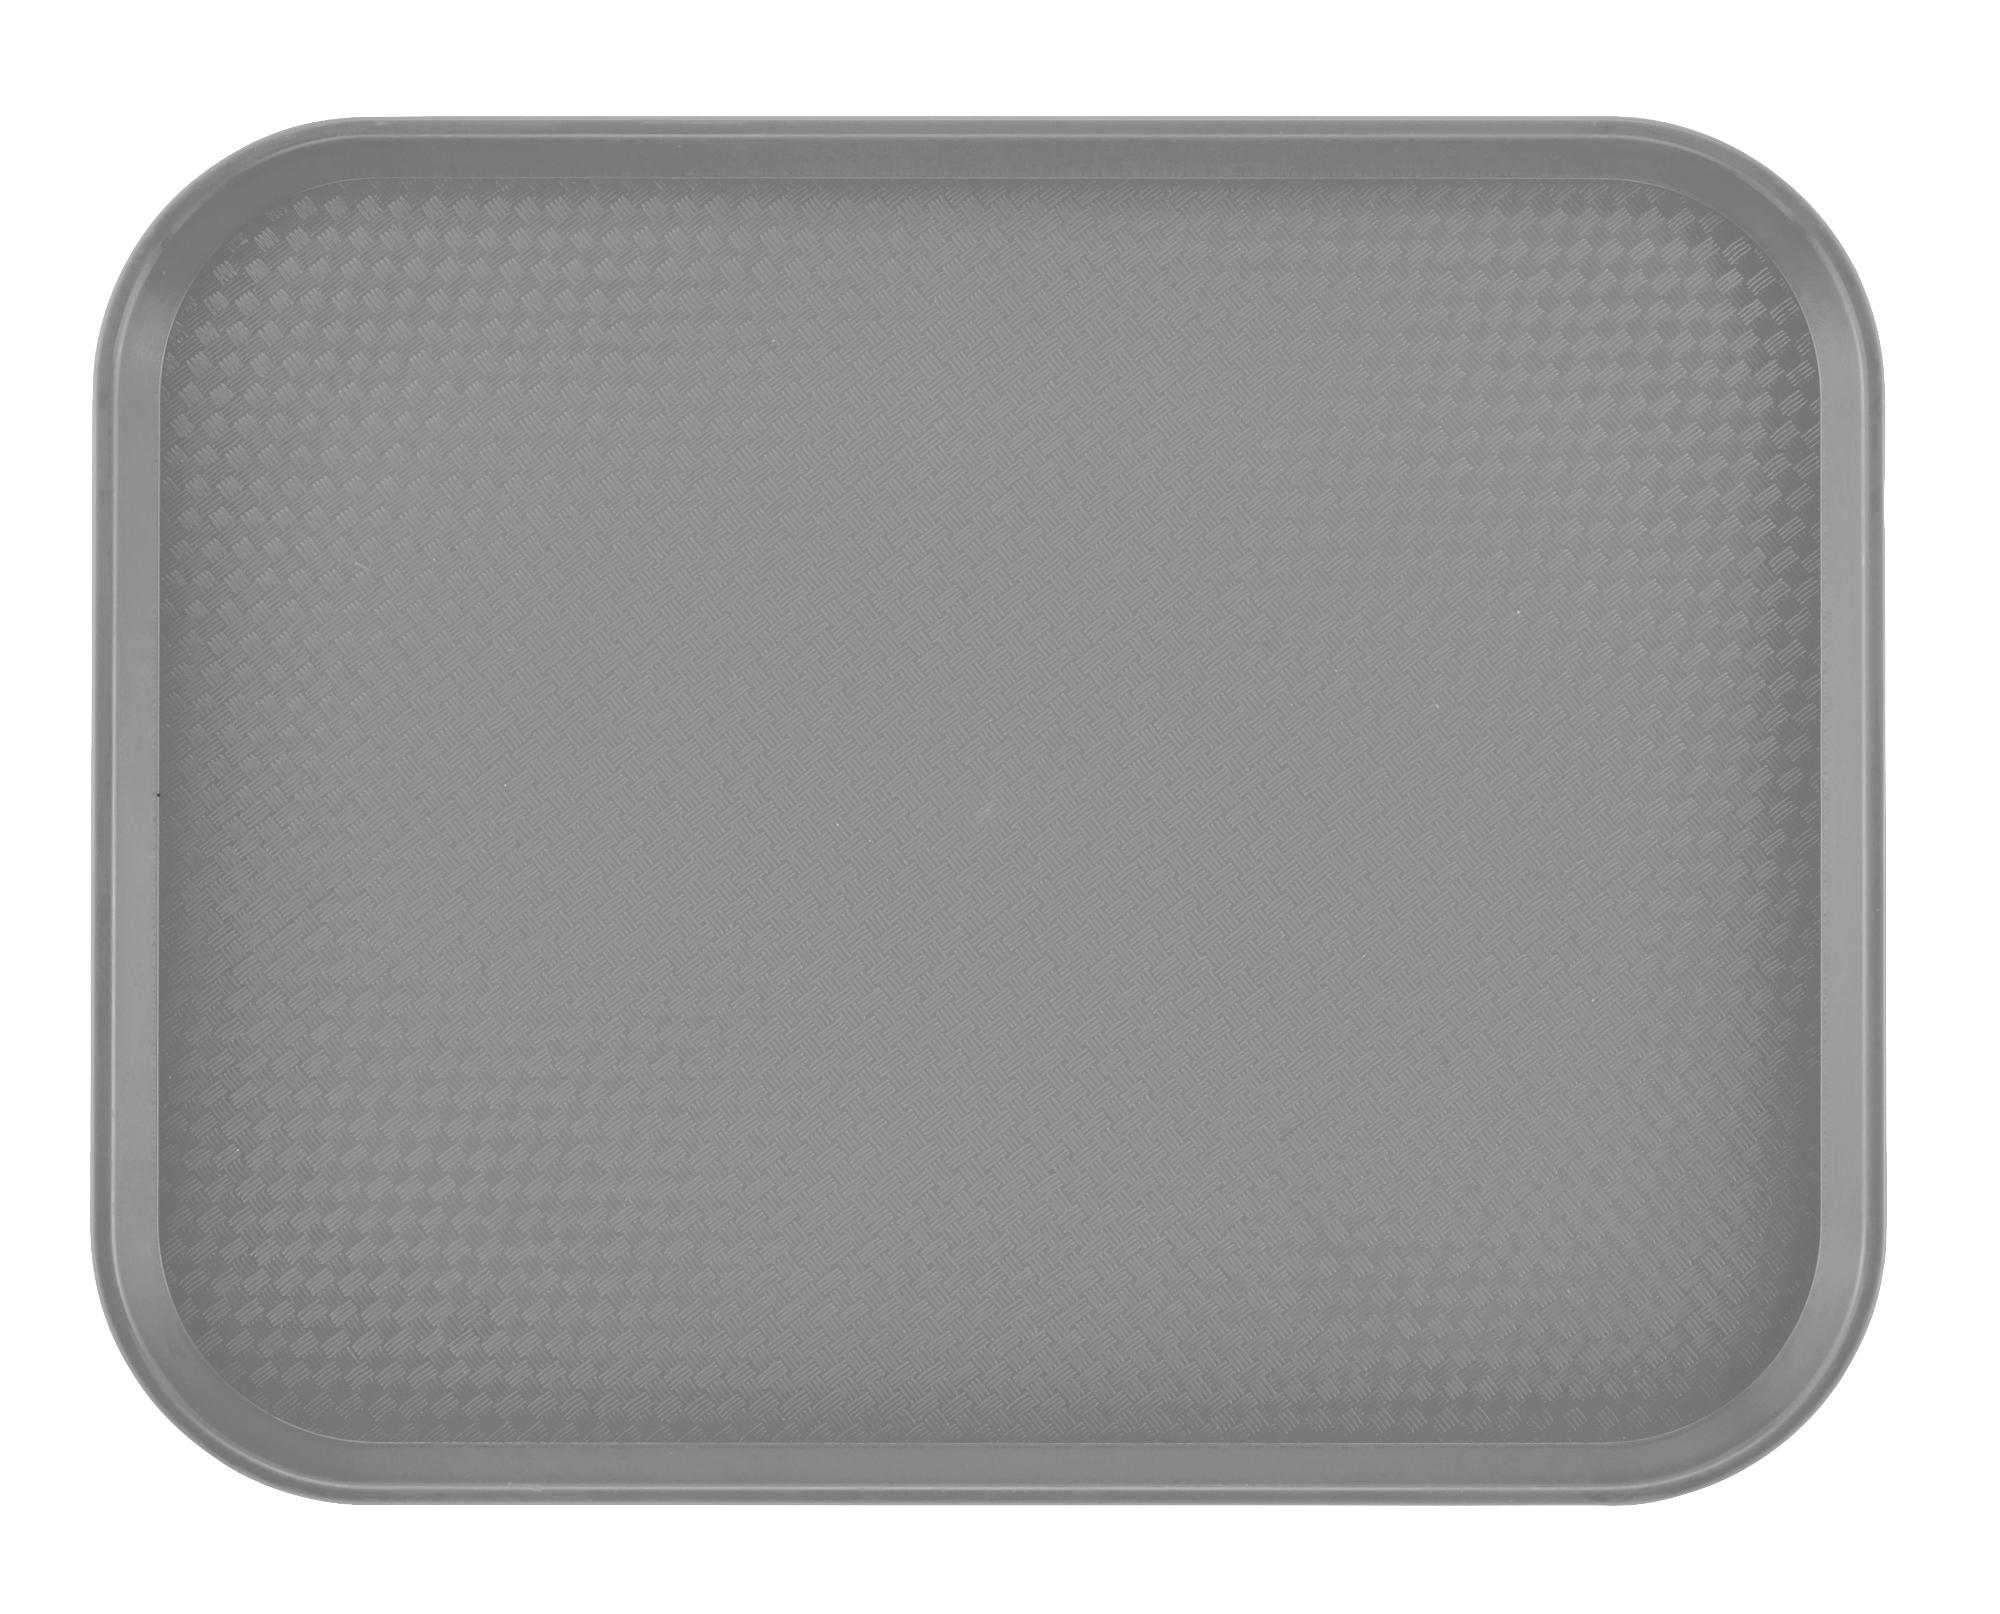 Fast Food polypropylene tray, textured surface, grey, 355x457 mm